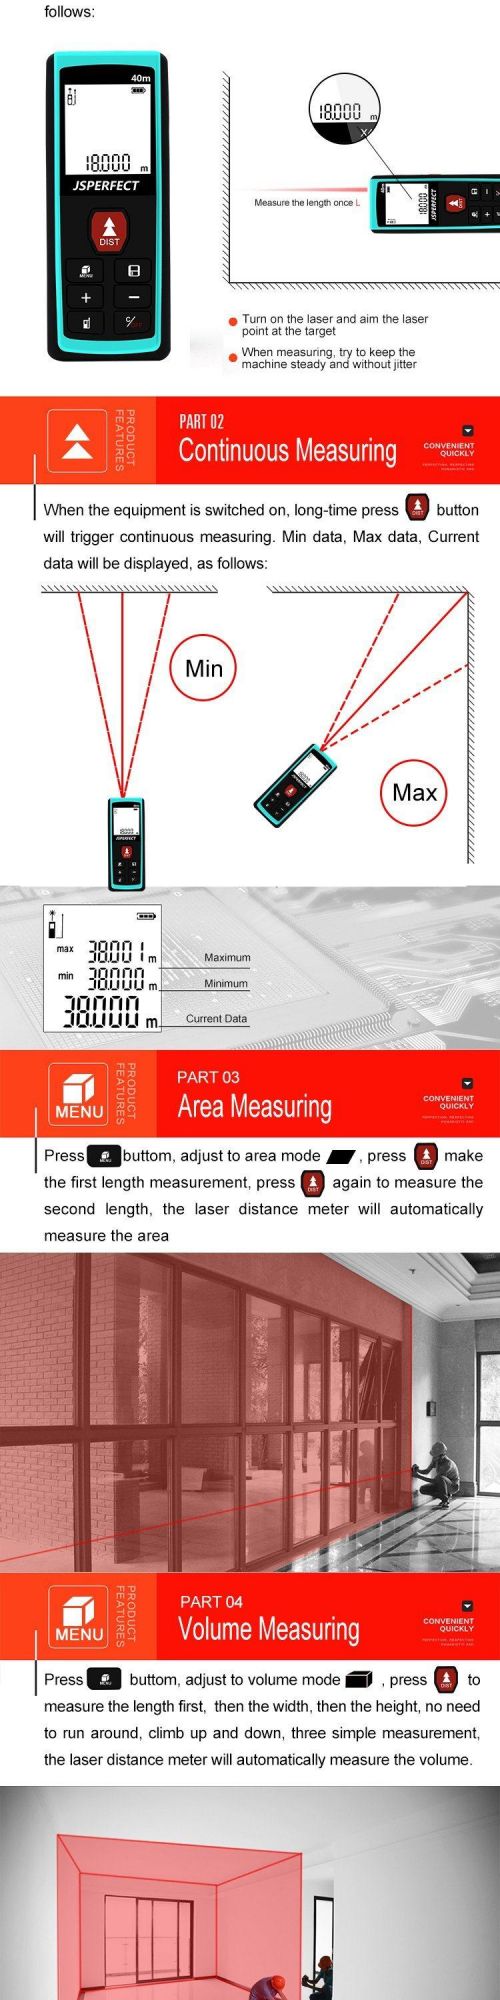 Tools for Measuring Area and Volume